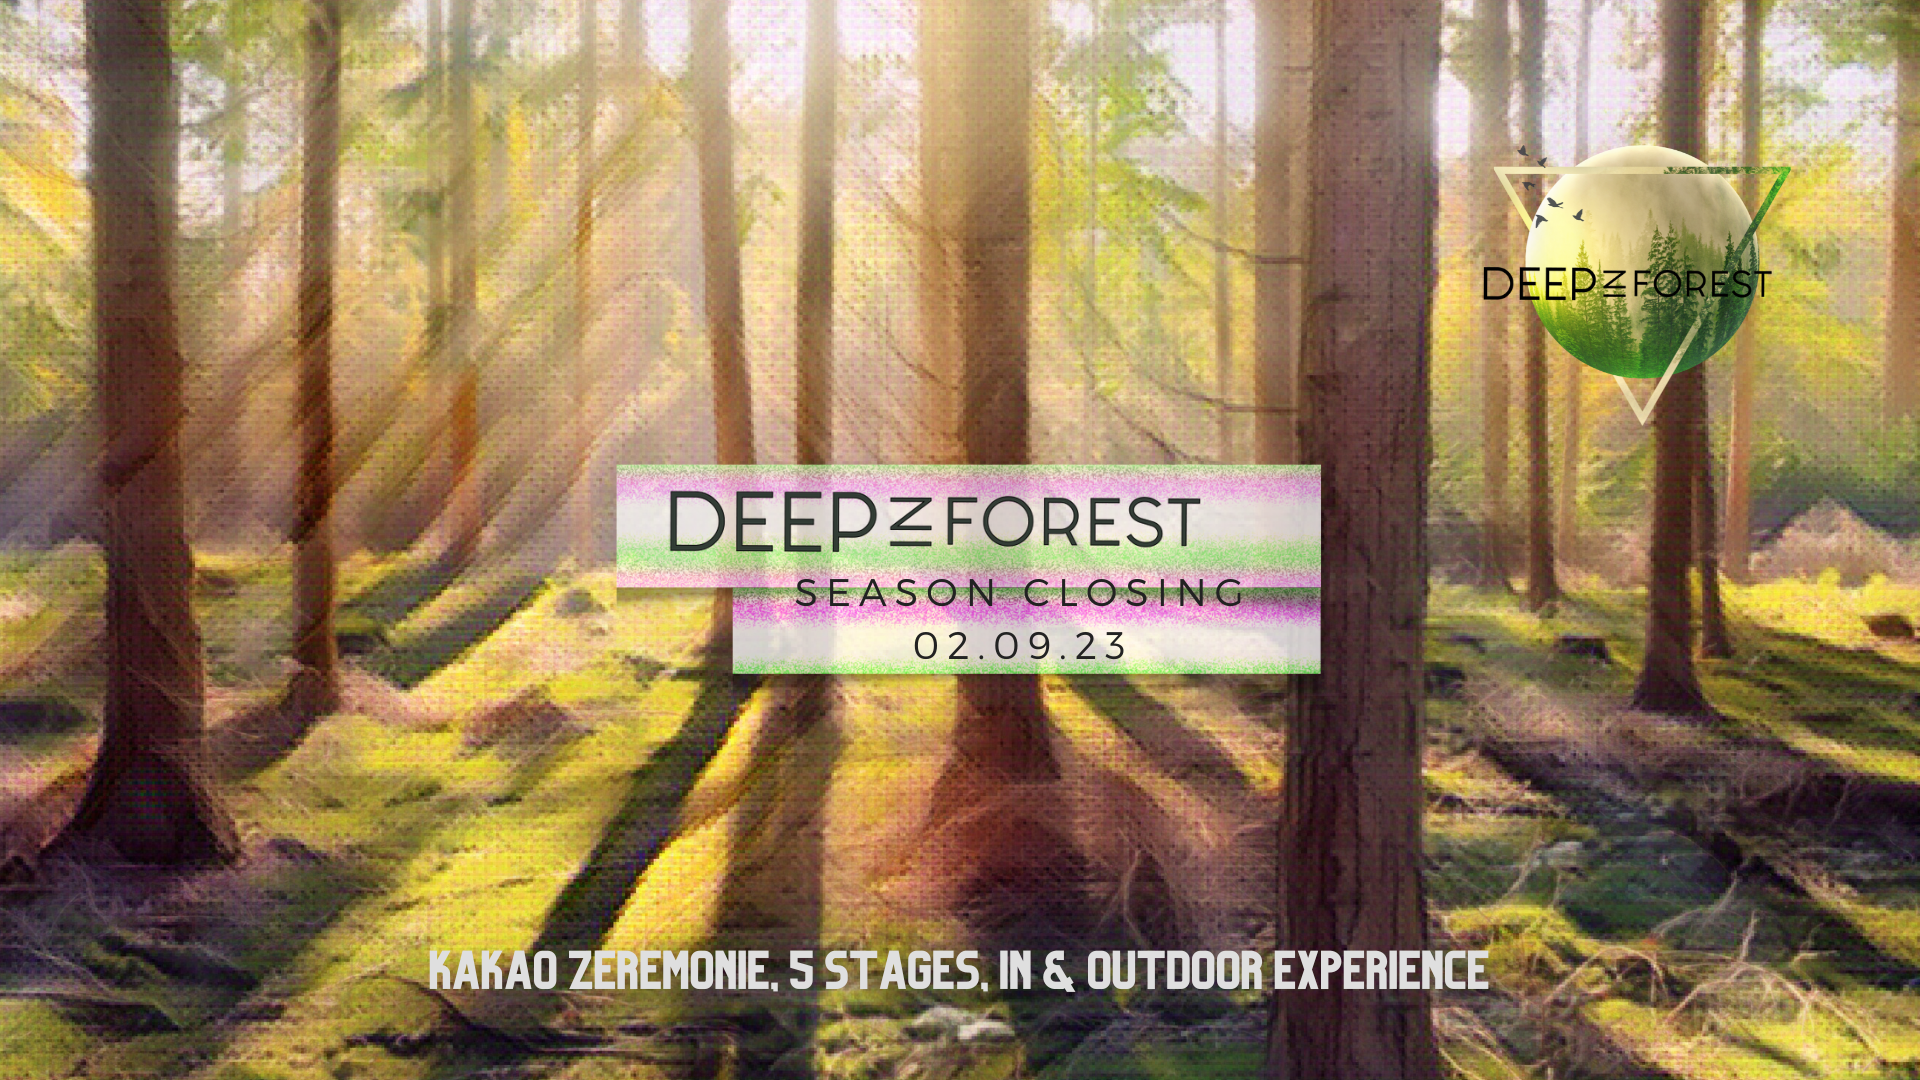 Deep in Forest - Season Closing - フライヤー表